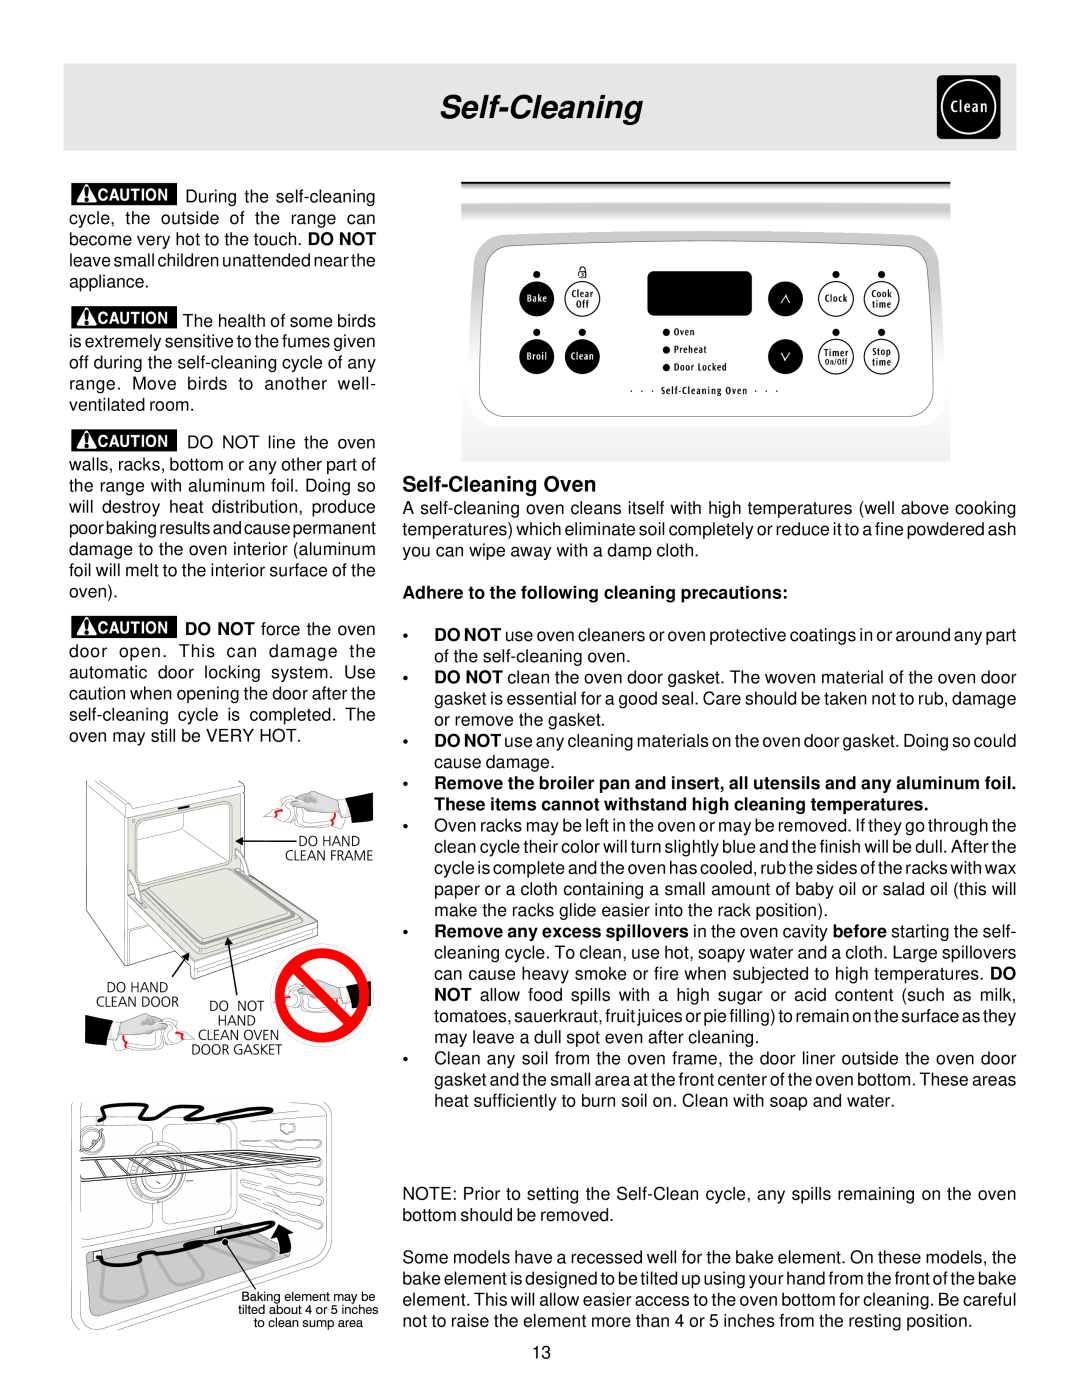 White-Westinghouse ES200/300 manual Self-CleaningOven, Adhere to the following cleaning precautions 